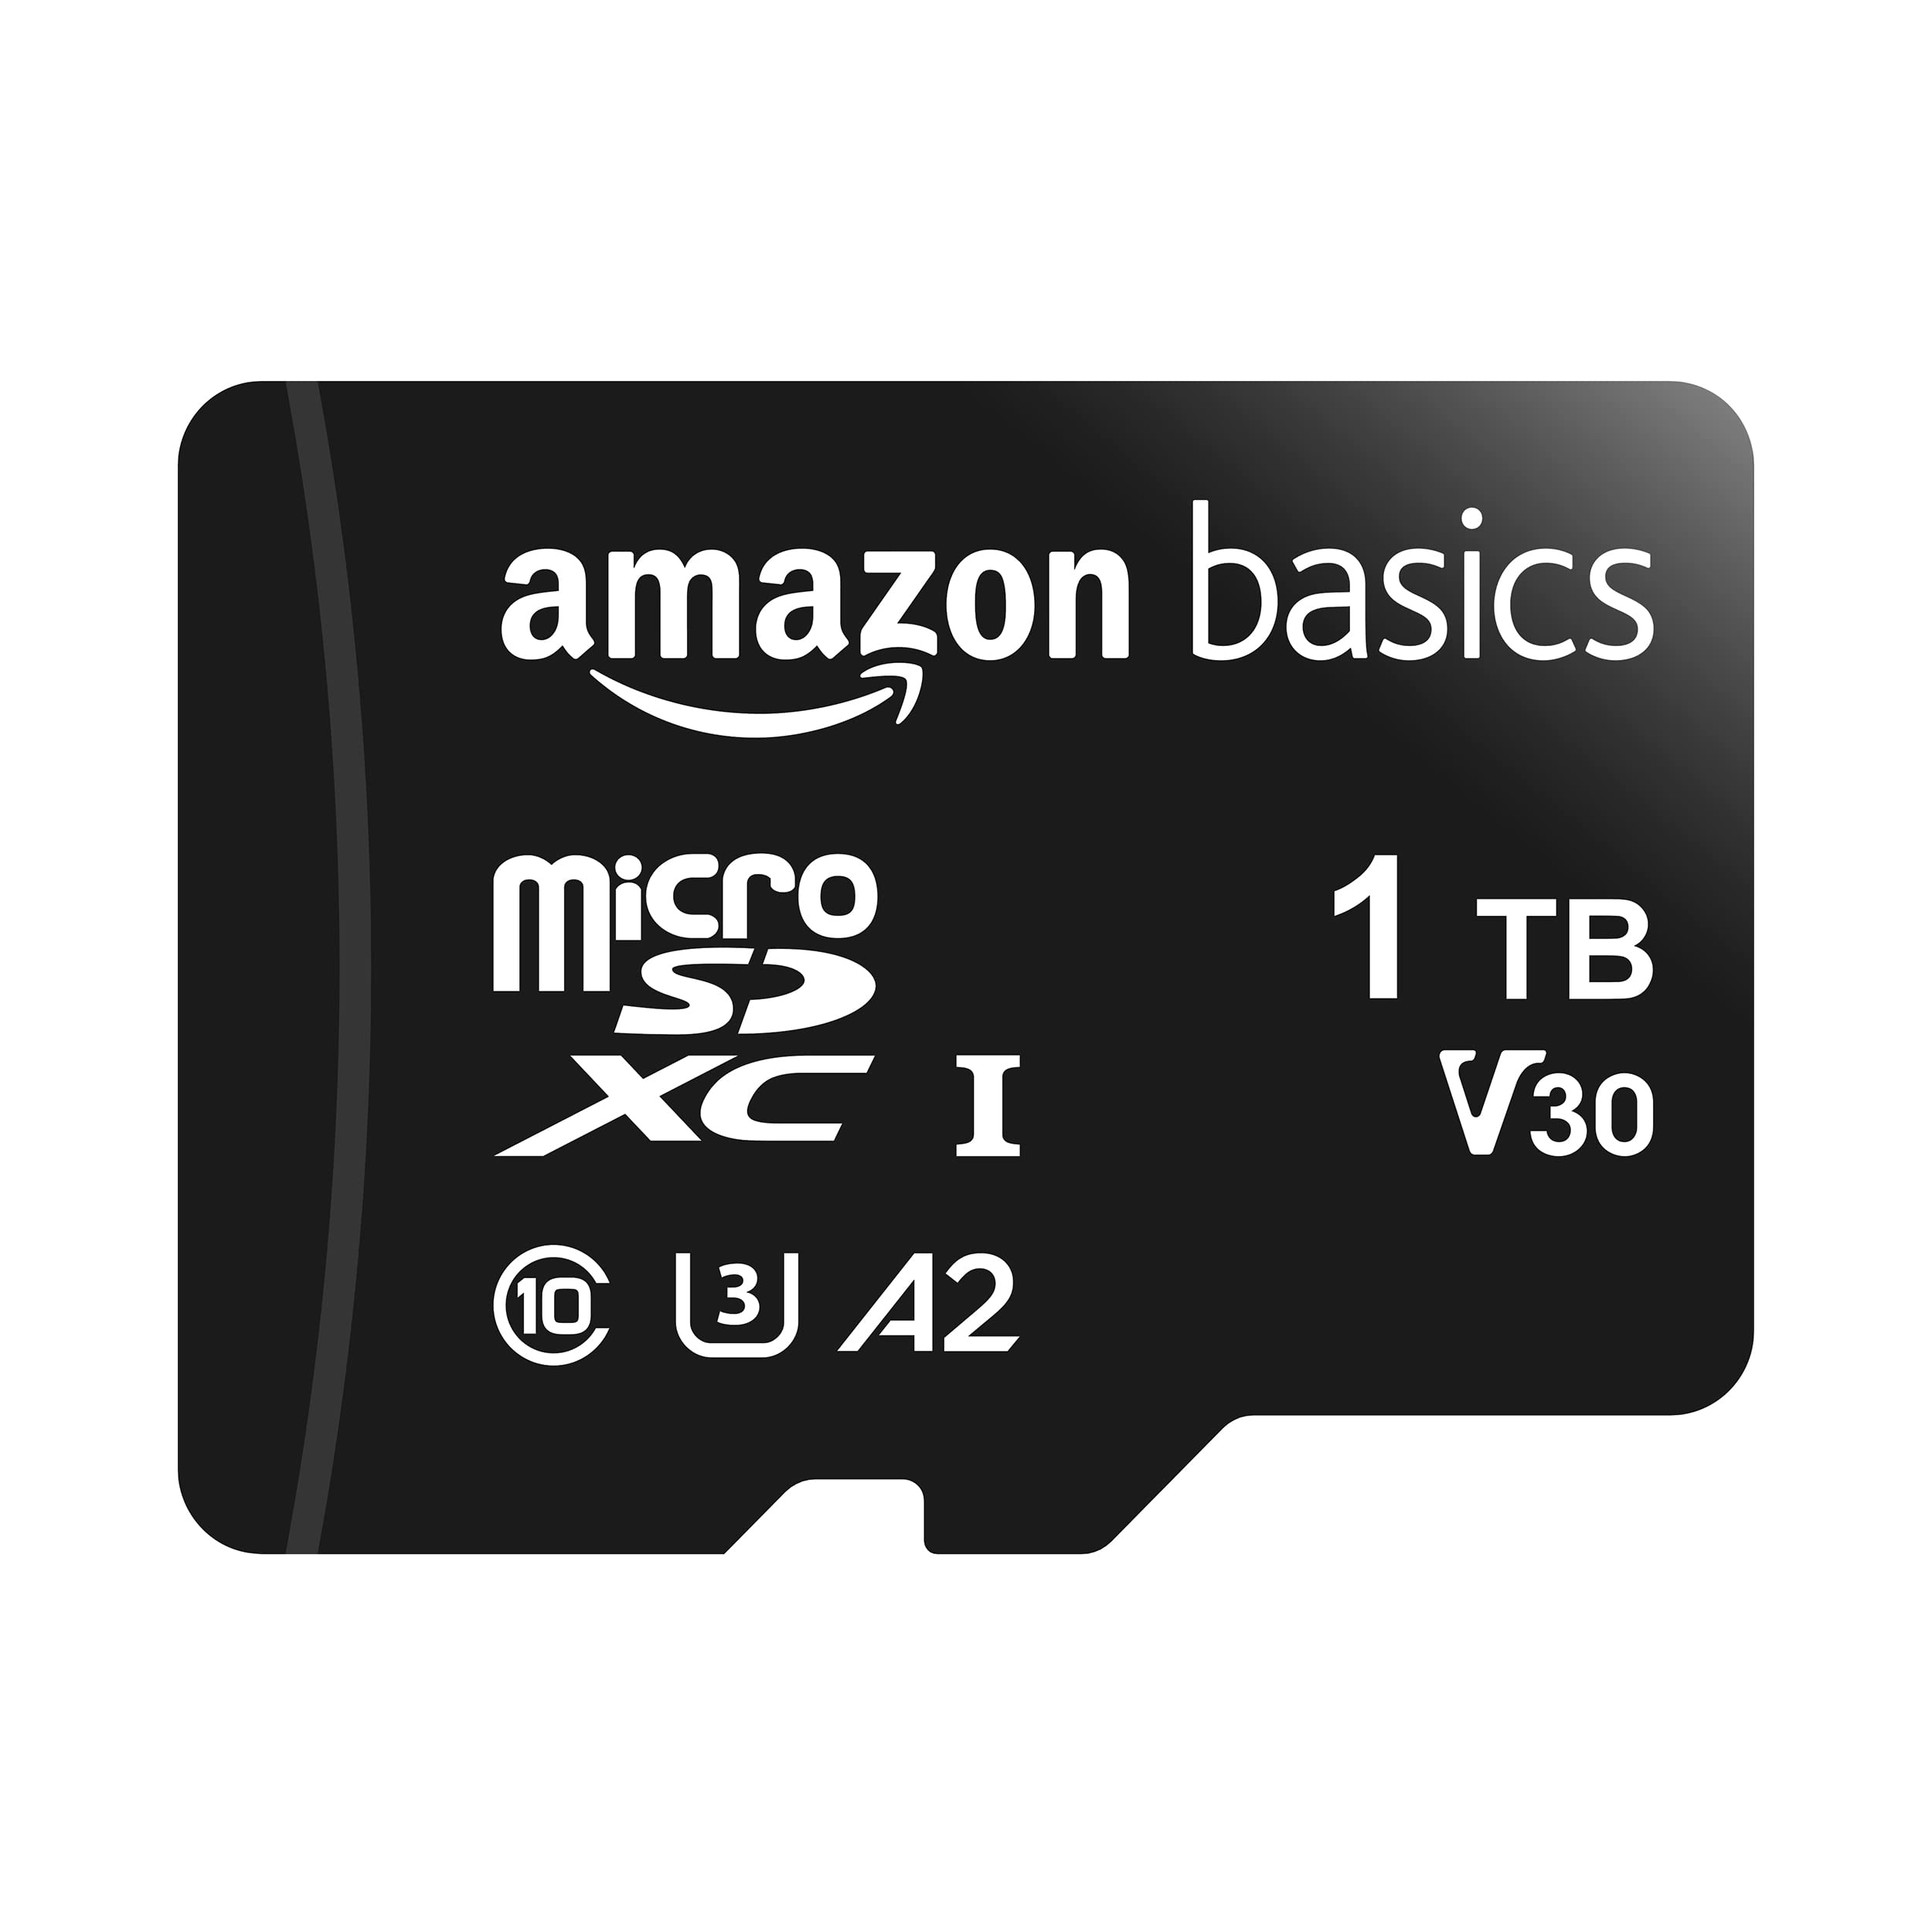 Amazon Basics microSDXC Memory Card with Full Size Adapter, A2, U3, Read Speed up to 100 MB/s, 1TB, Black